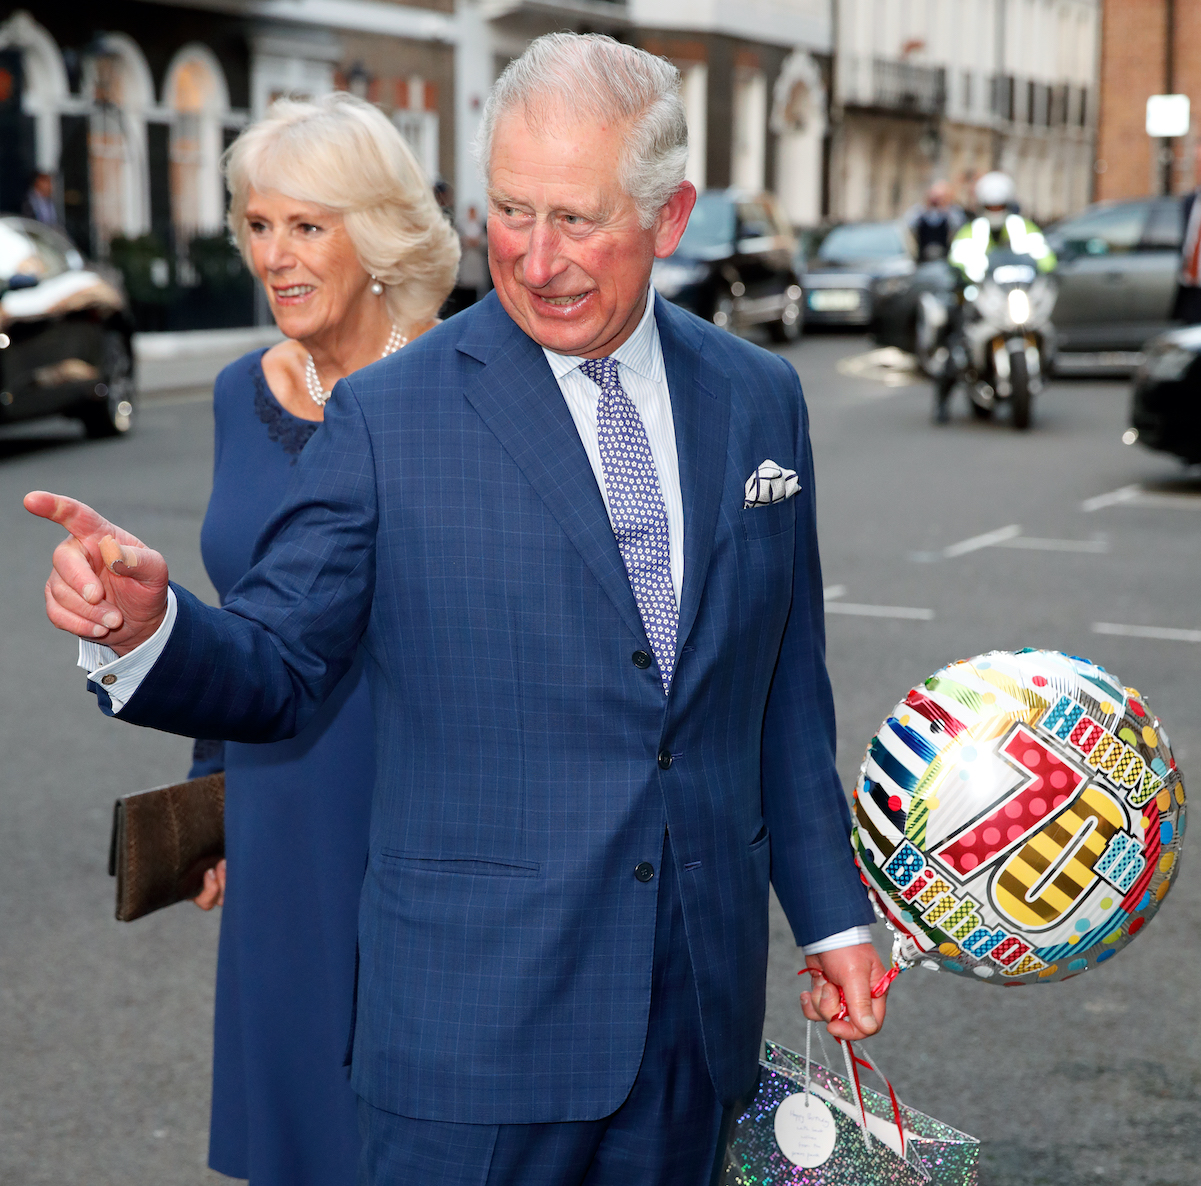 King Charles celebrates his 70th birthday in 2018